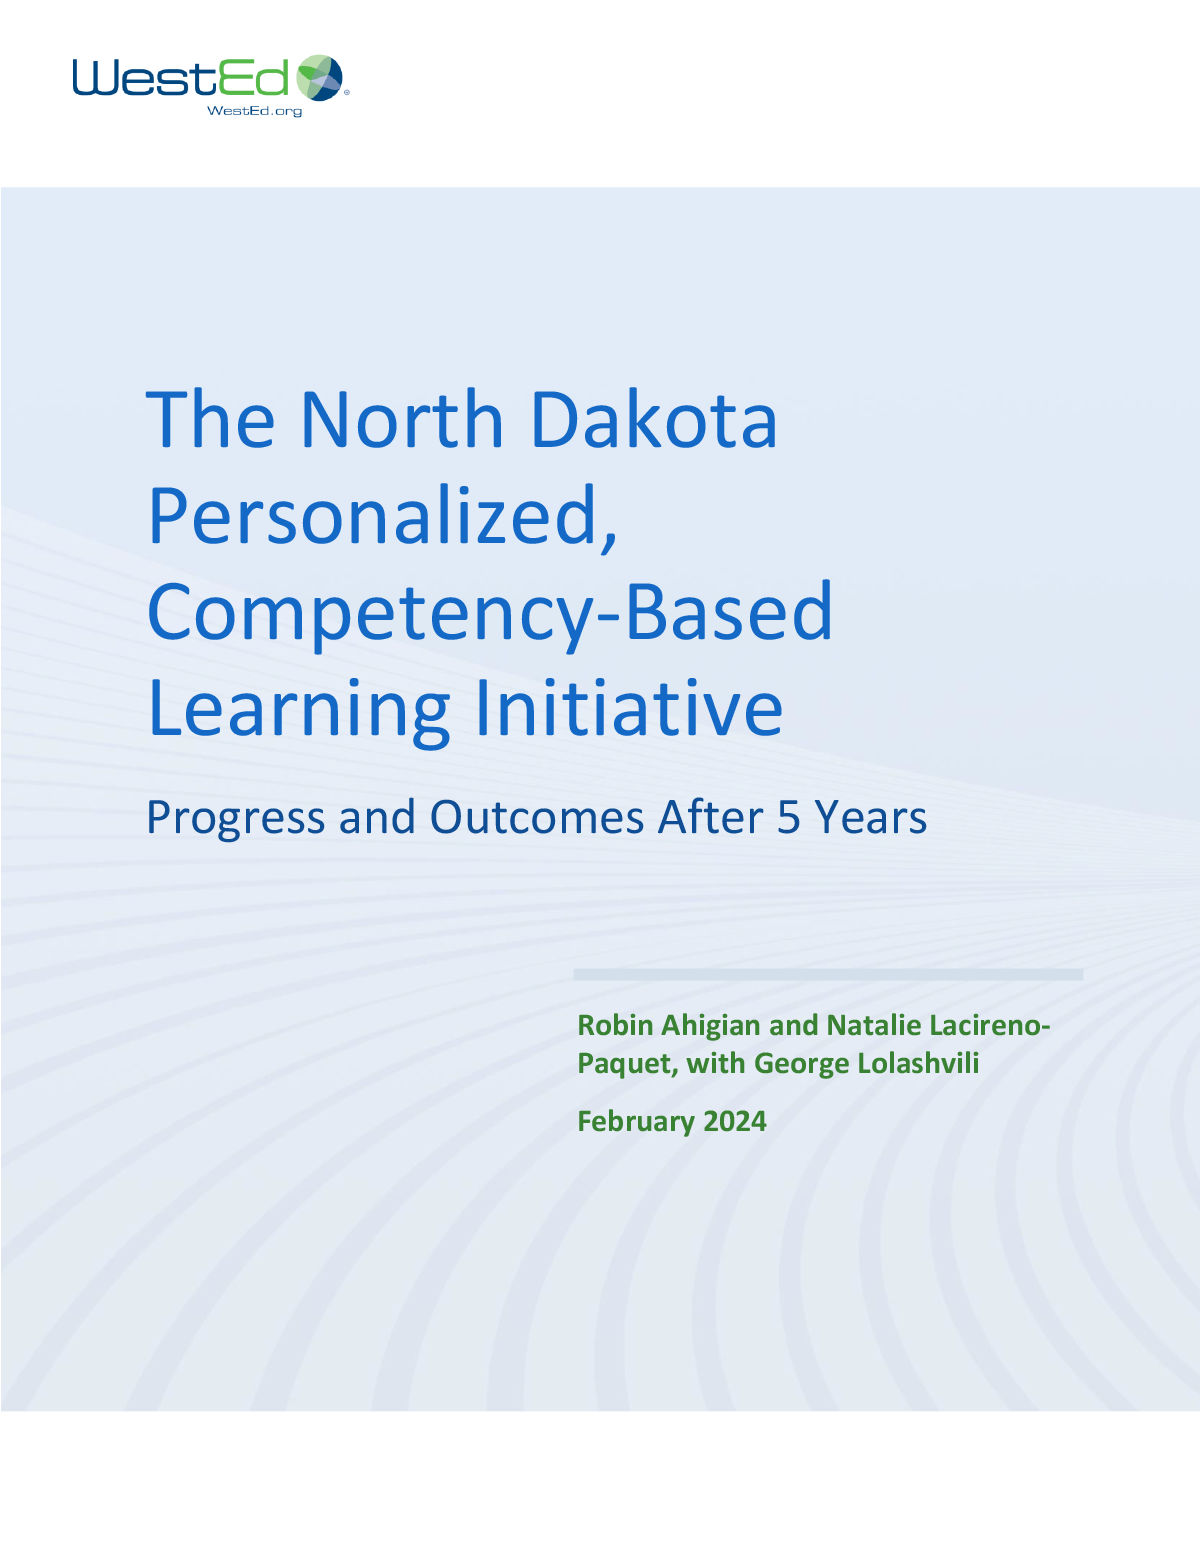 The North Dakota Personalized, Competency-Based Learning Initiative: Progress and Outcomes After 5 Years